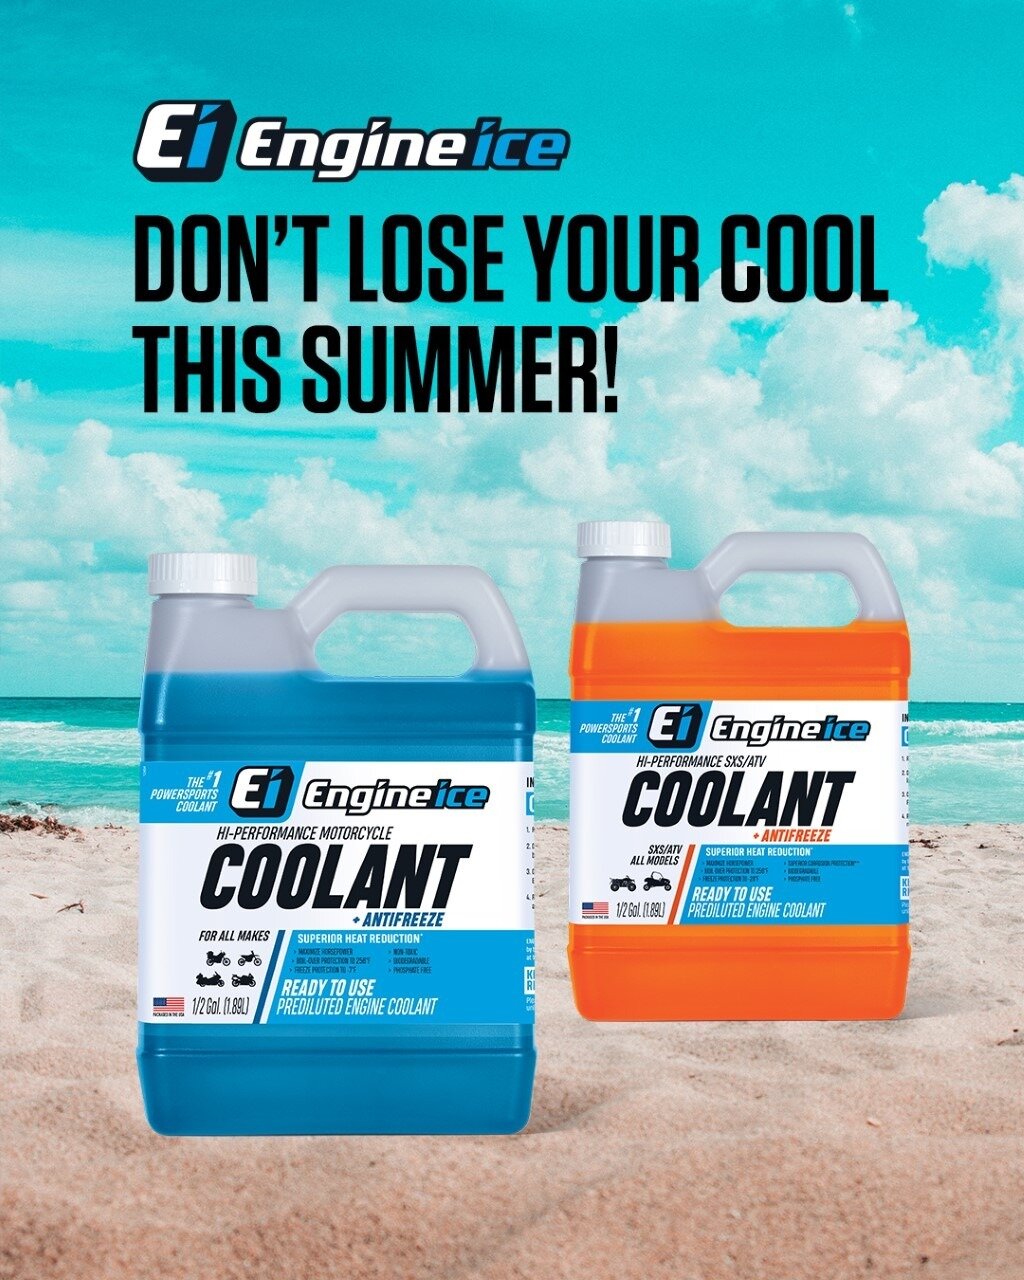 DON'T LOSE YOUR COOL THIS SUMMER!

Engine Ice Hi-Performance Coolant provides superior heat transfer to maximize horsepower output in all powersport vehicles. Keep your cool no matter how hot the competition or how treacherous the terrain becomes.

#